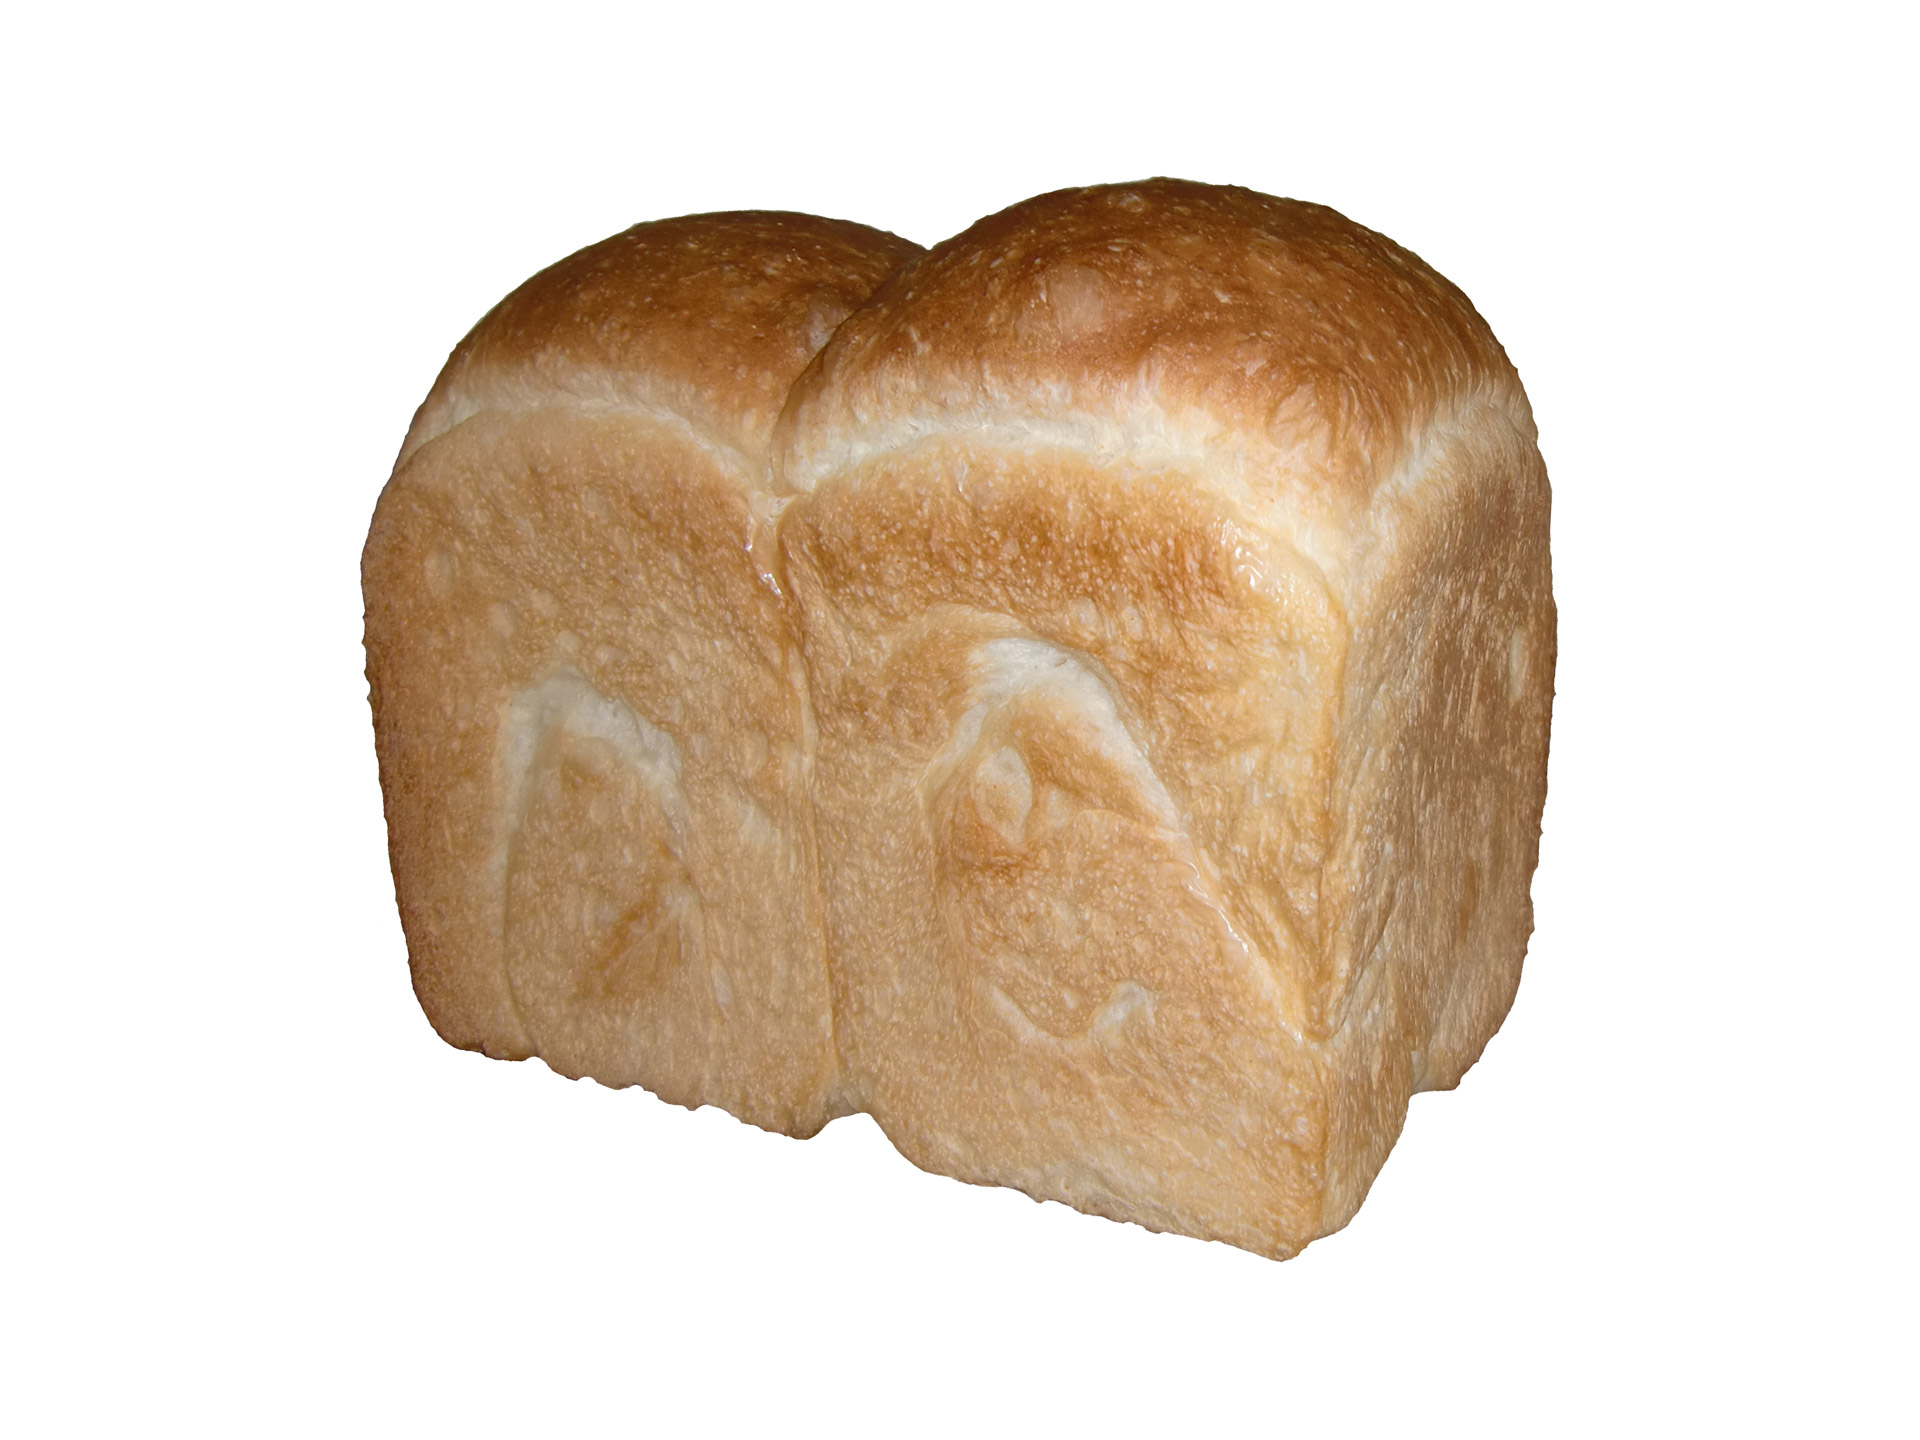 white loaf bread free photo